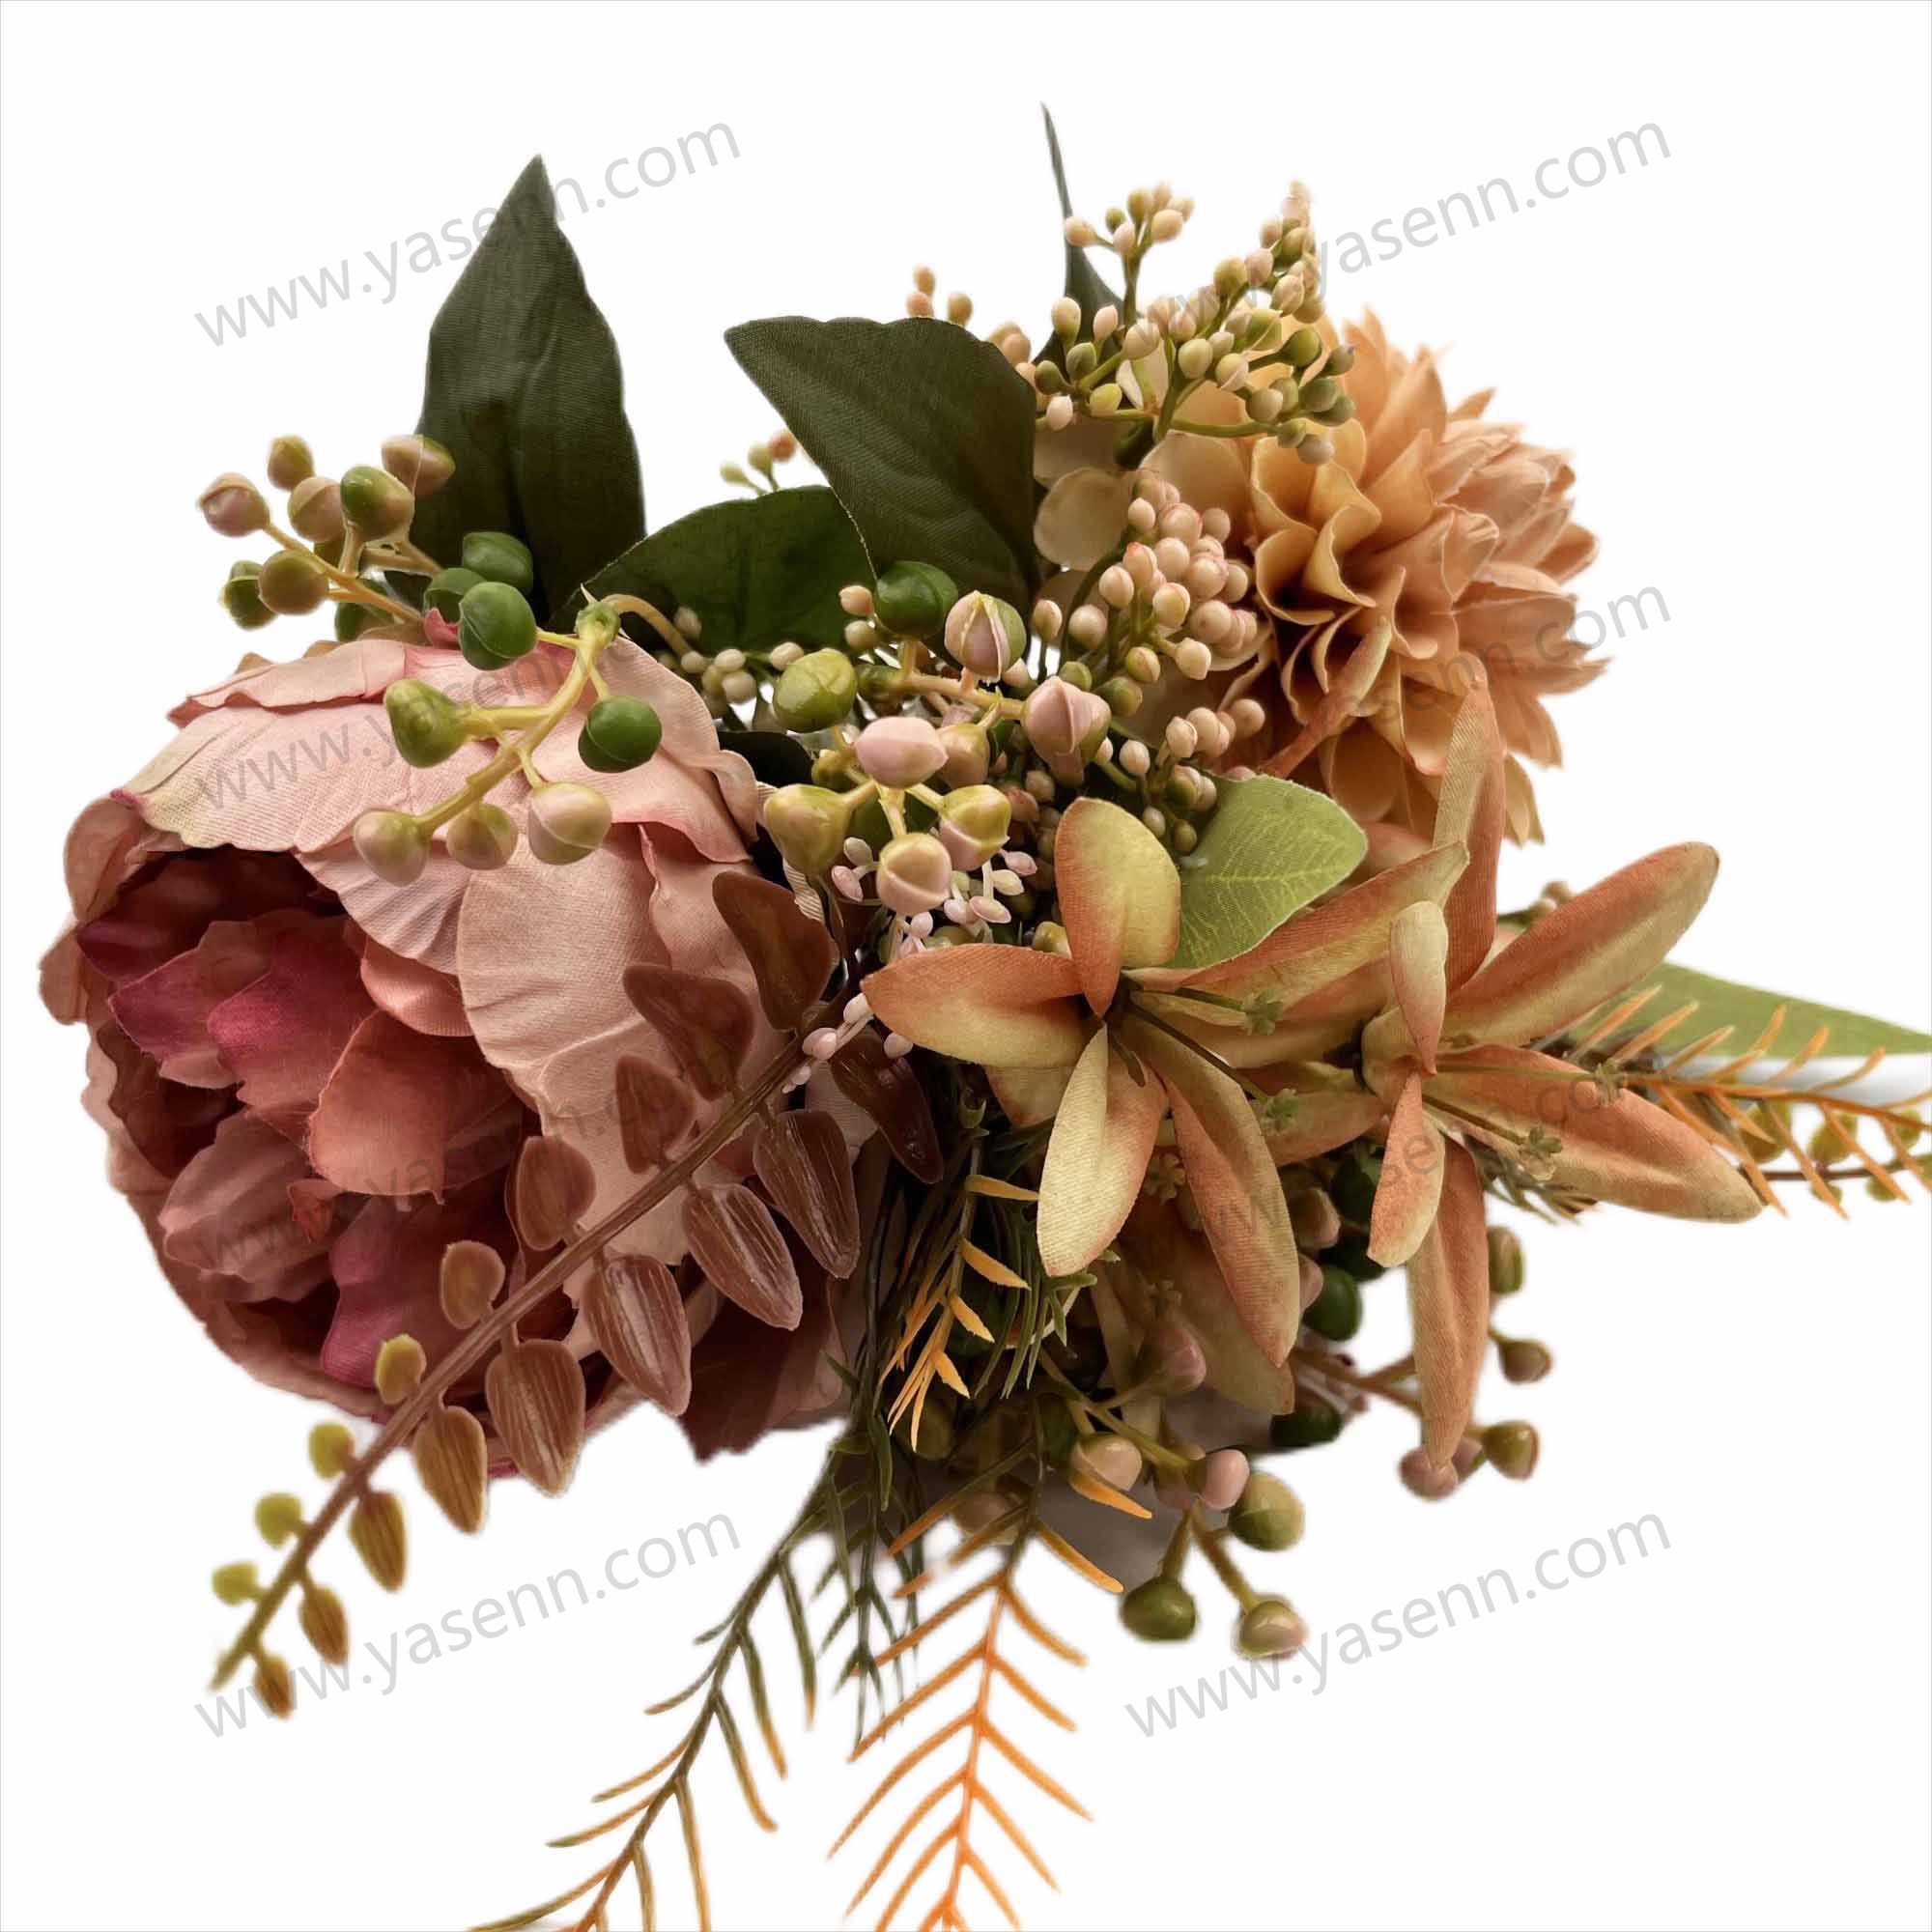 6 BRANCHES PEONY CHRYSANTHEMUM bridal bouquet artificial flowers YSB23186